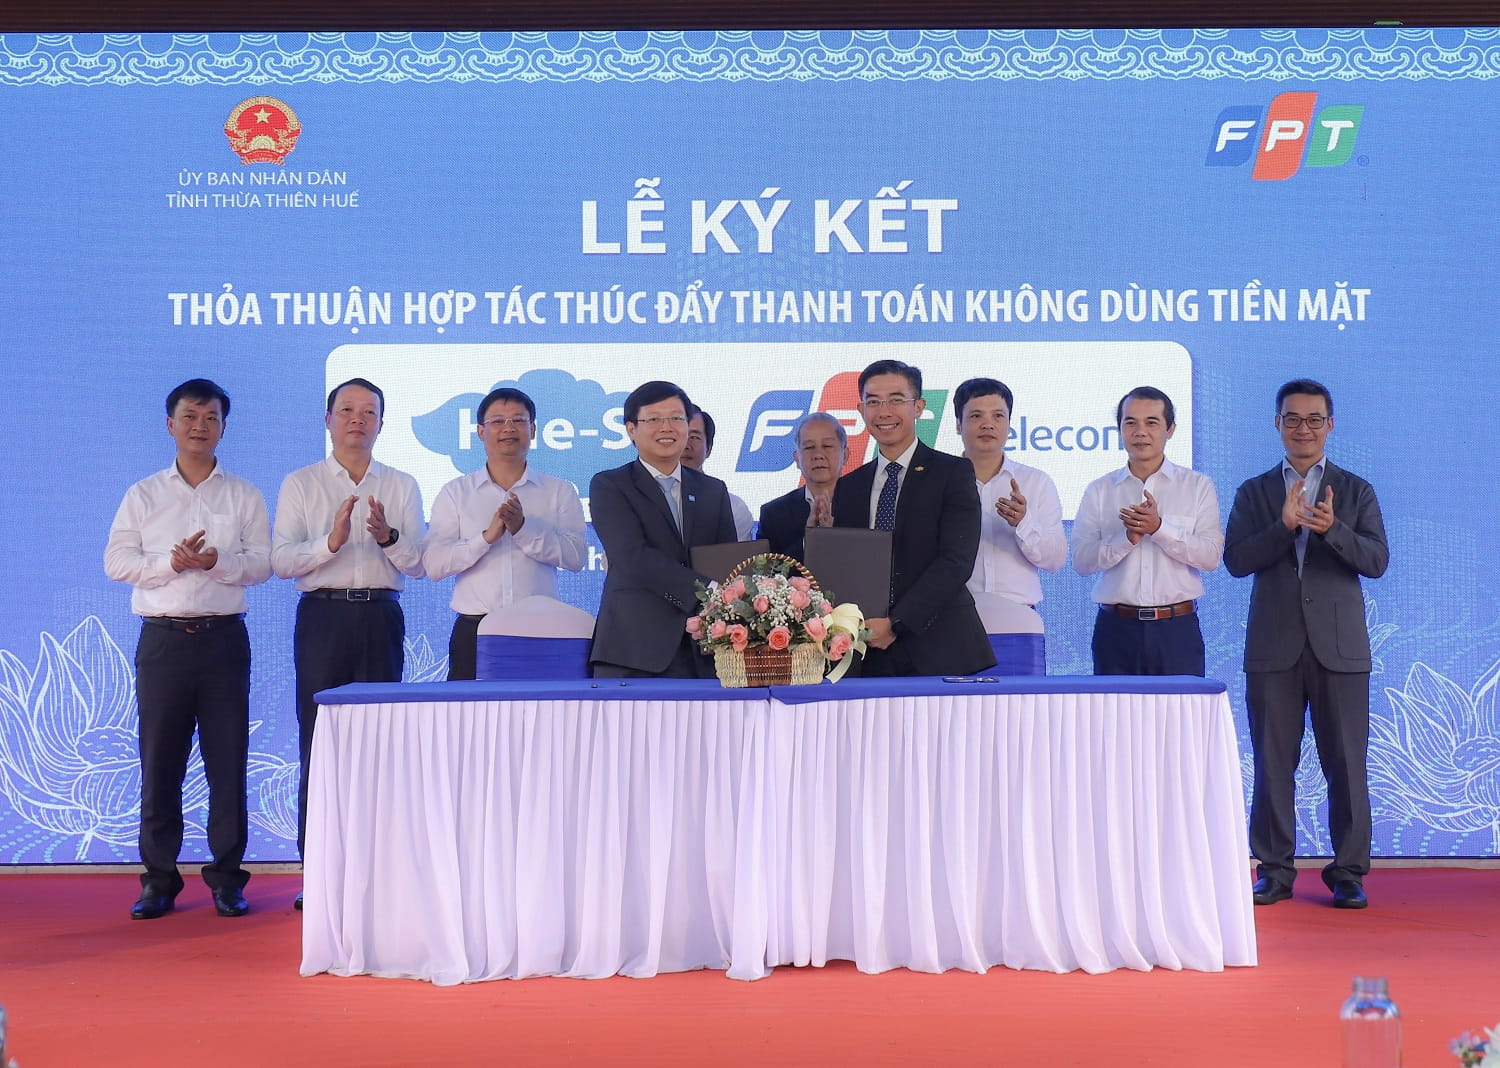 Mr. Bui Hoang Minh - Director of Thua Thien Hue Smart City Monitoring and Controlling Center - and Mr. Hoang Viet Anh - CEO of FPT Telecom - signed the cooperation agreement